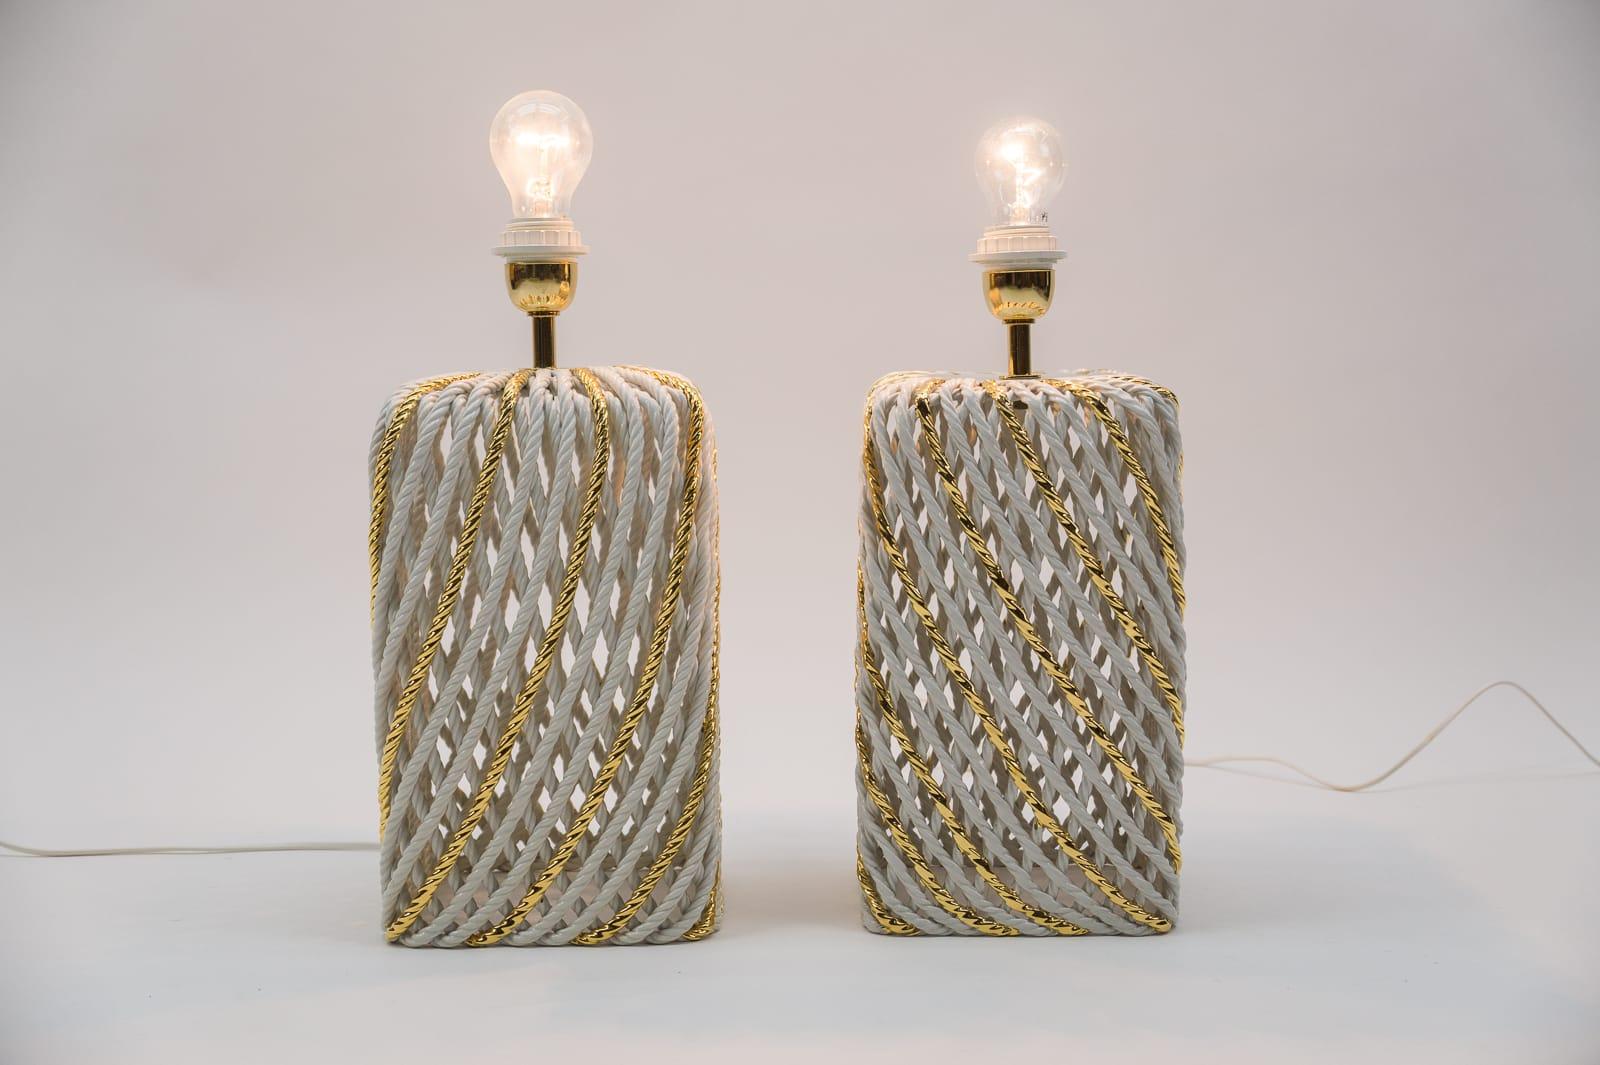 Hollywood Regency Pair of Extravagant Ceramic Braid Table Lamps, 1980s Italy For Sale